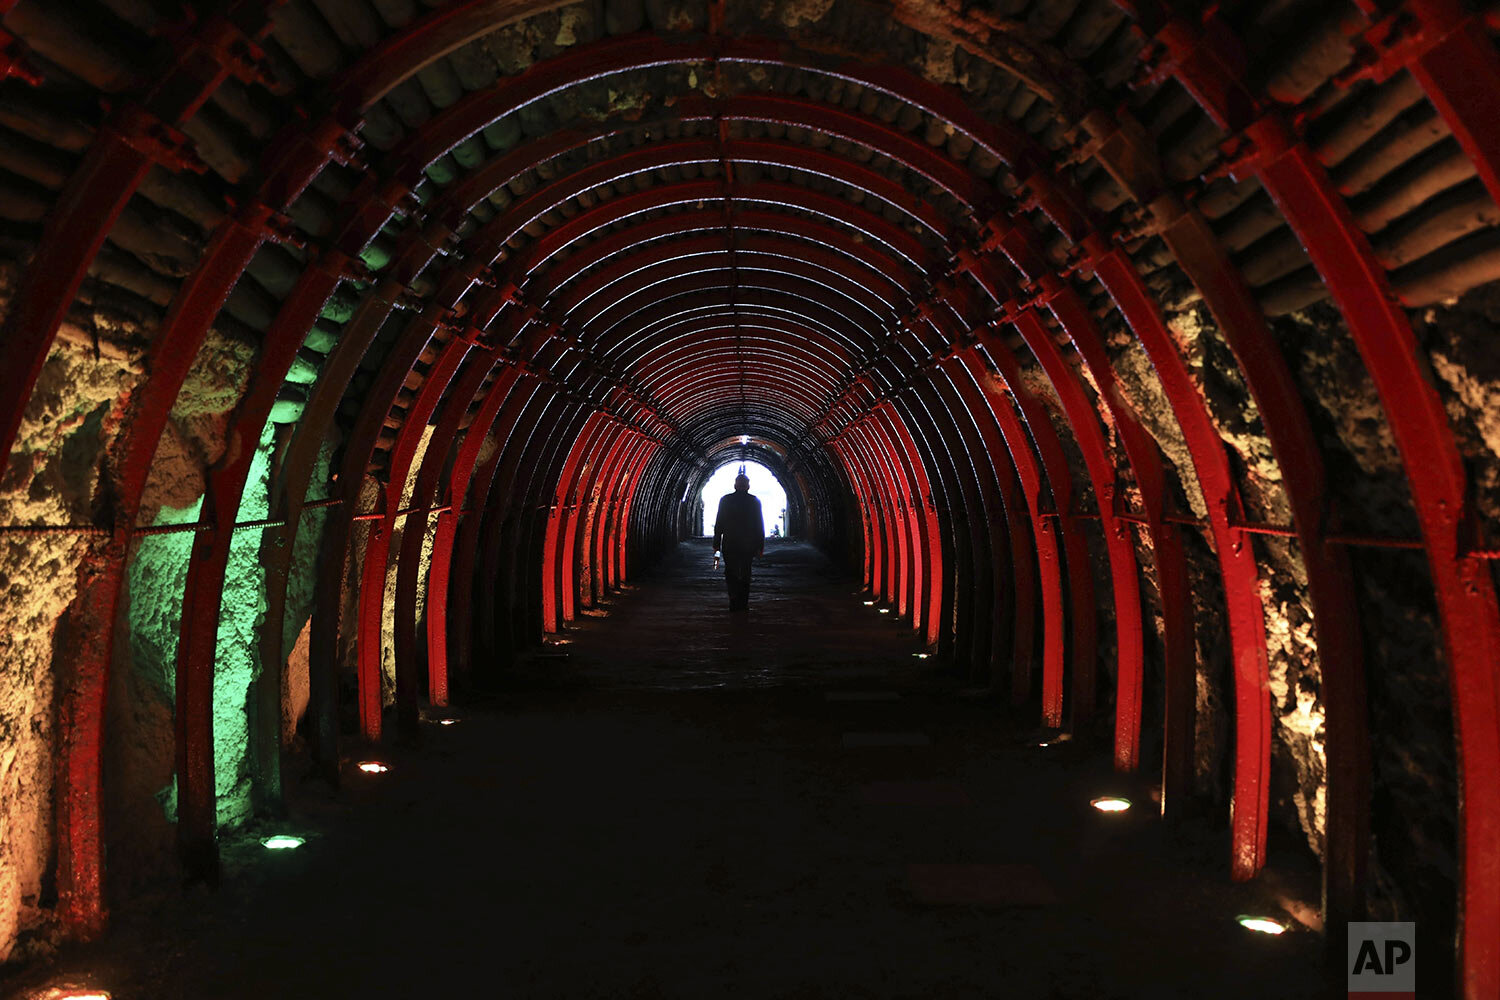  A man exits after touring the underground, New Salt Cathedral in Zipaquira, Colombia, Wednesday, Dec. 16, 2020. Considered the First Wonder of Colombia, the architectural, religious, and salt mining site marked its first 25 years of history in 2020.